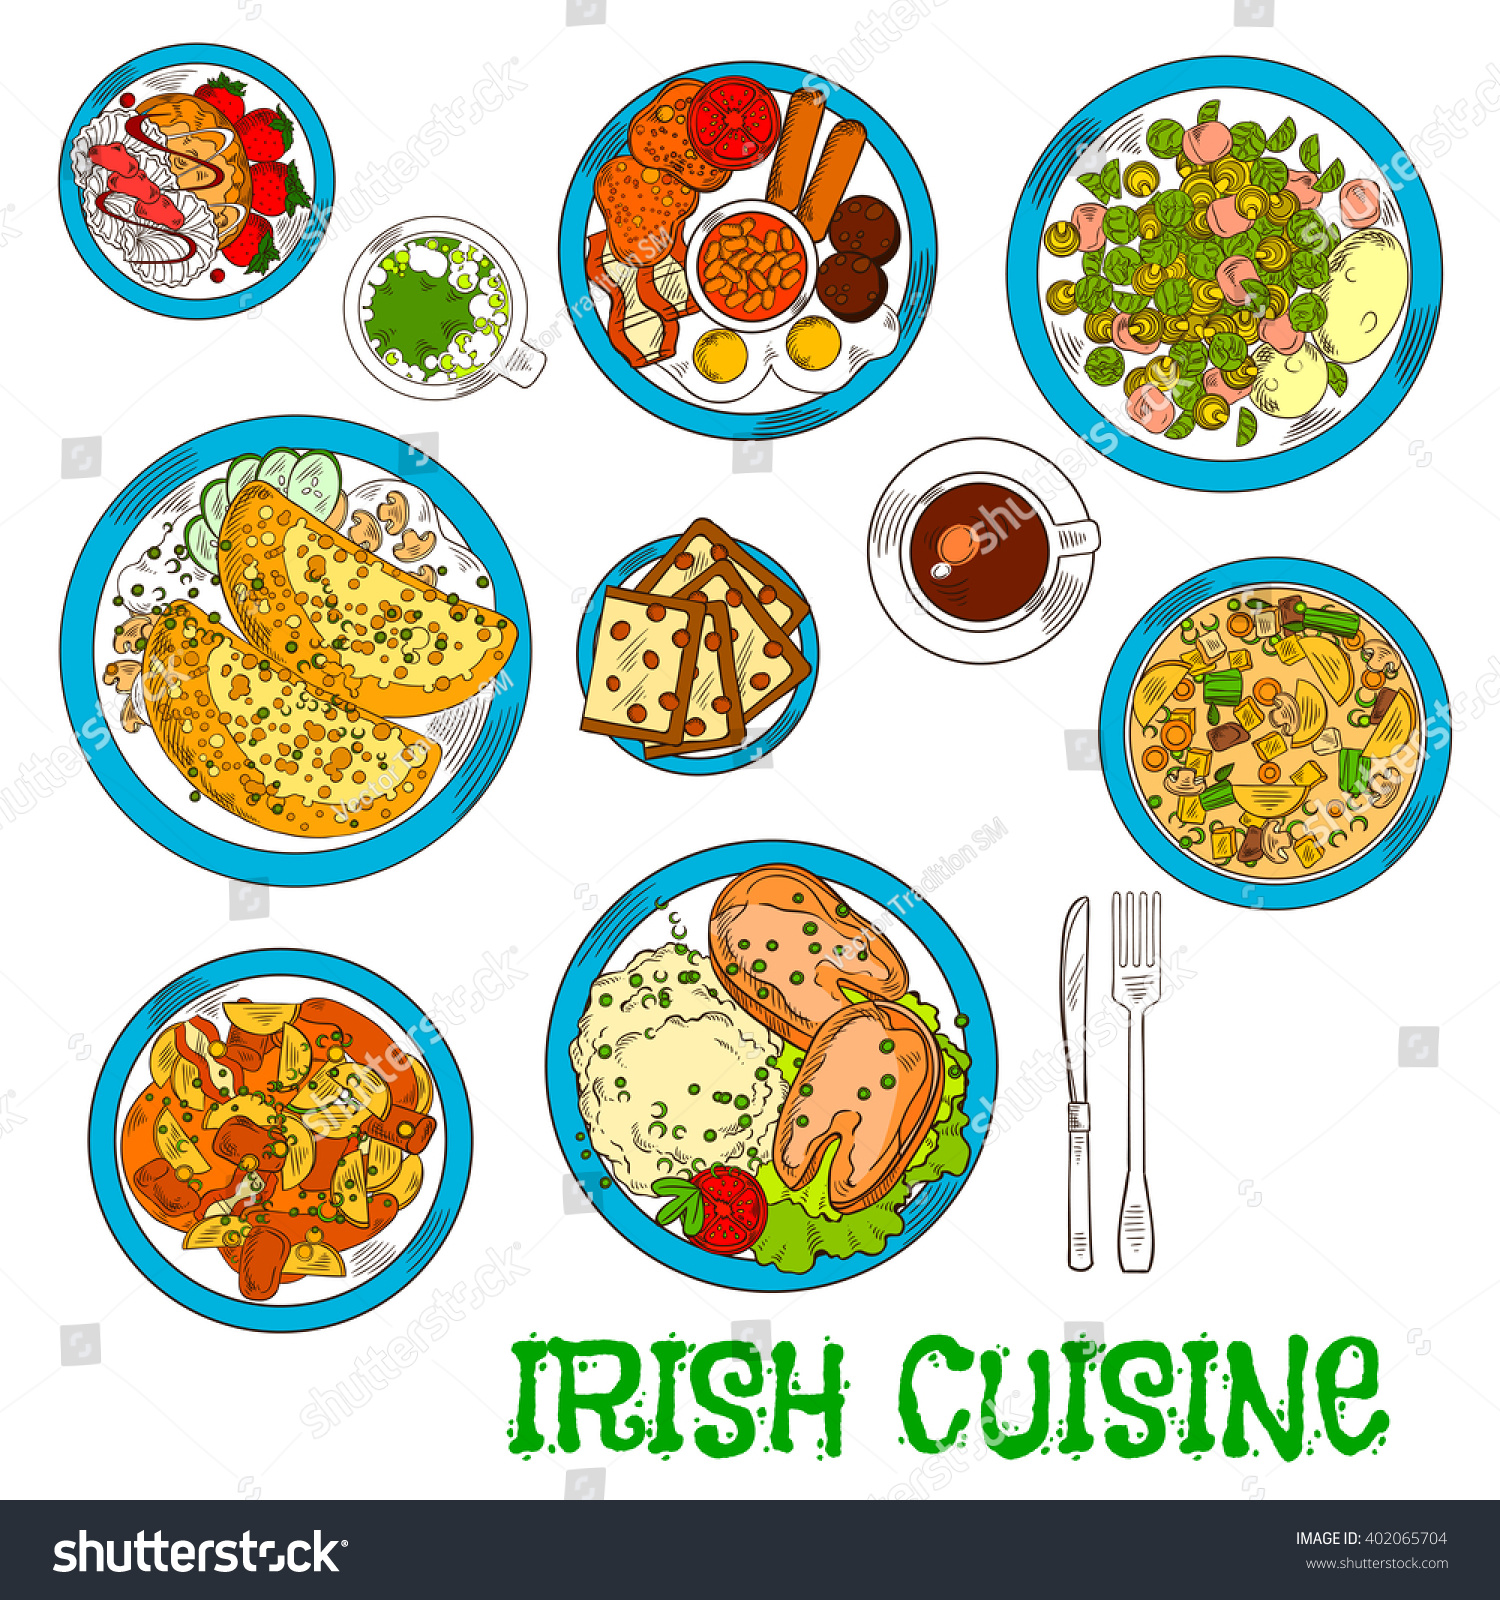 SVG of Irish cuisine dishes with vegetable lamb stew and potato pancakes boxty, potato stew coddle with sausages, mashed potato with fish, bread, meringue dessert with strawberries, green beer and coffee cup svg